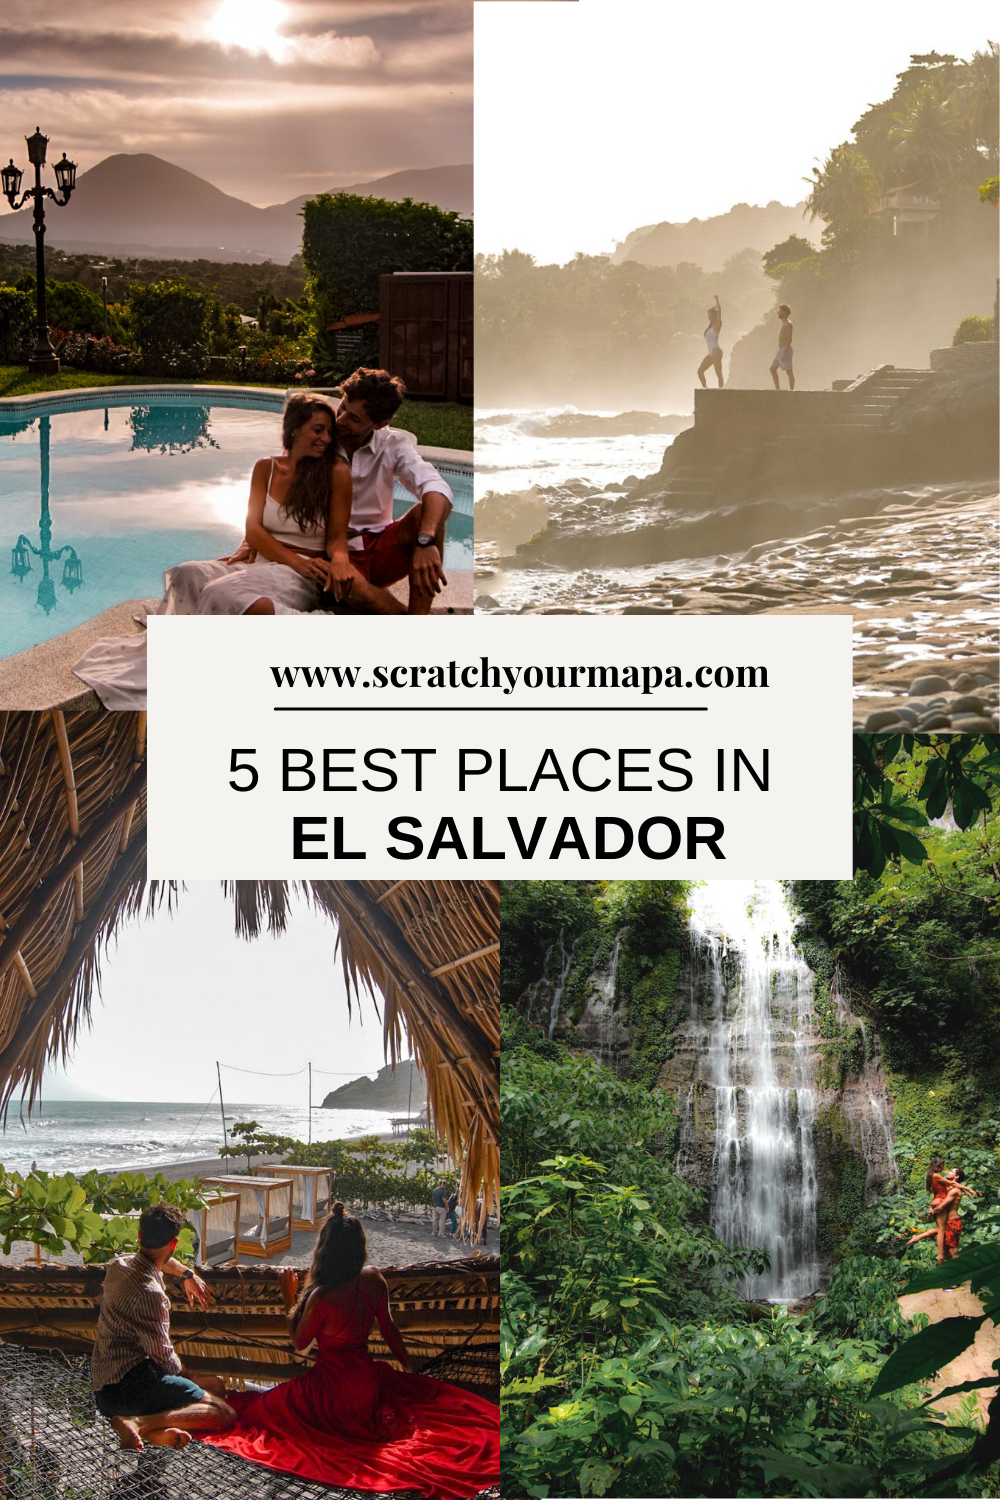 The 5 Best Places to Visit in El Salvador - Scratch your mapa